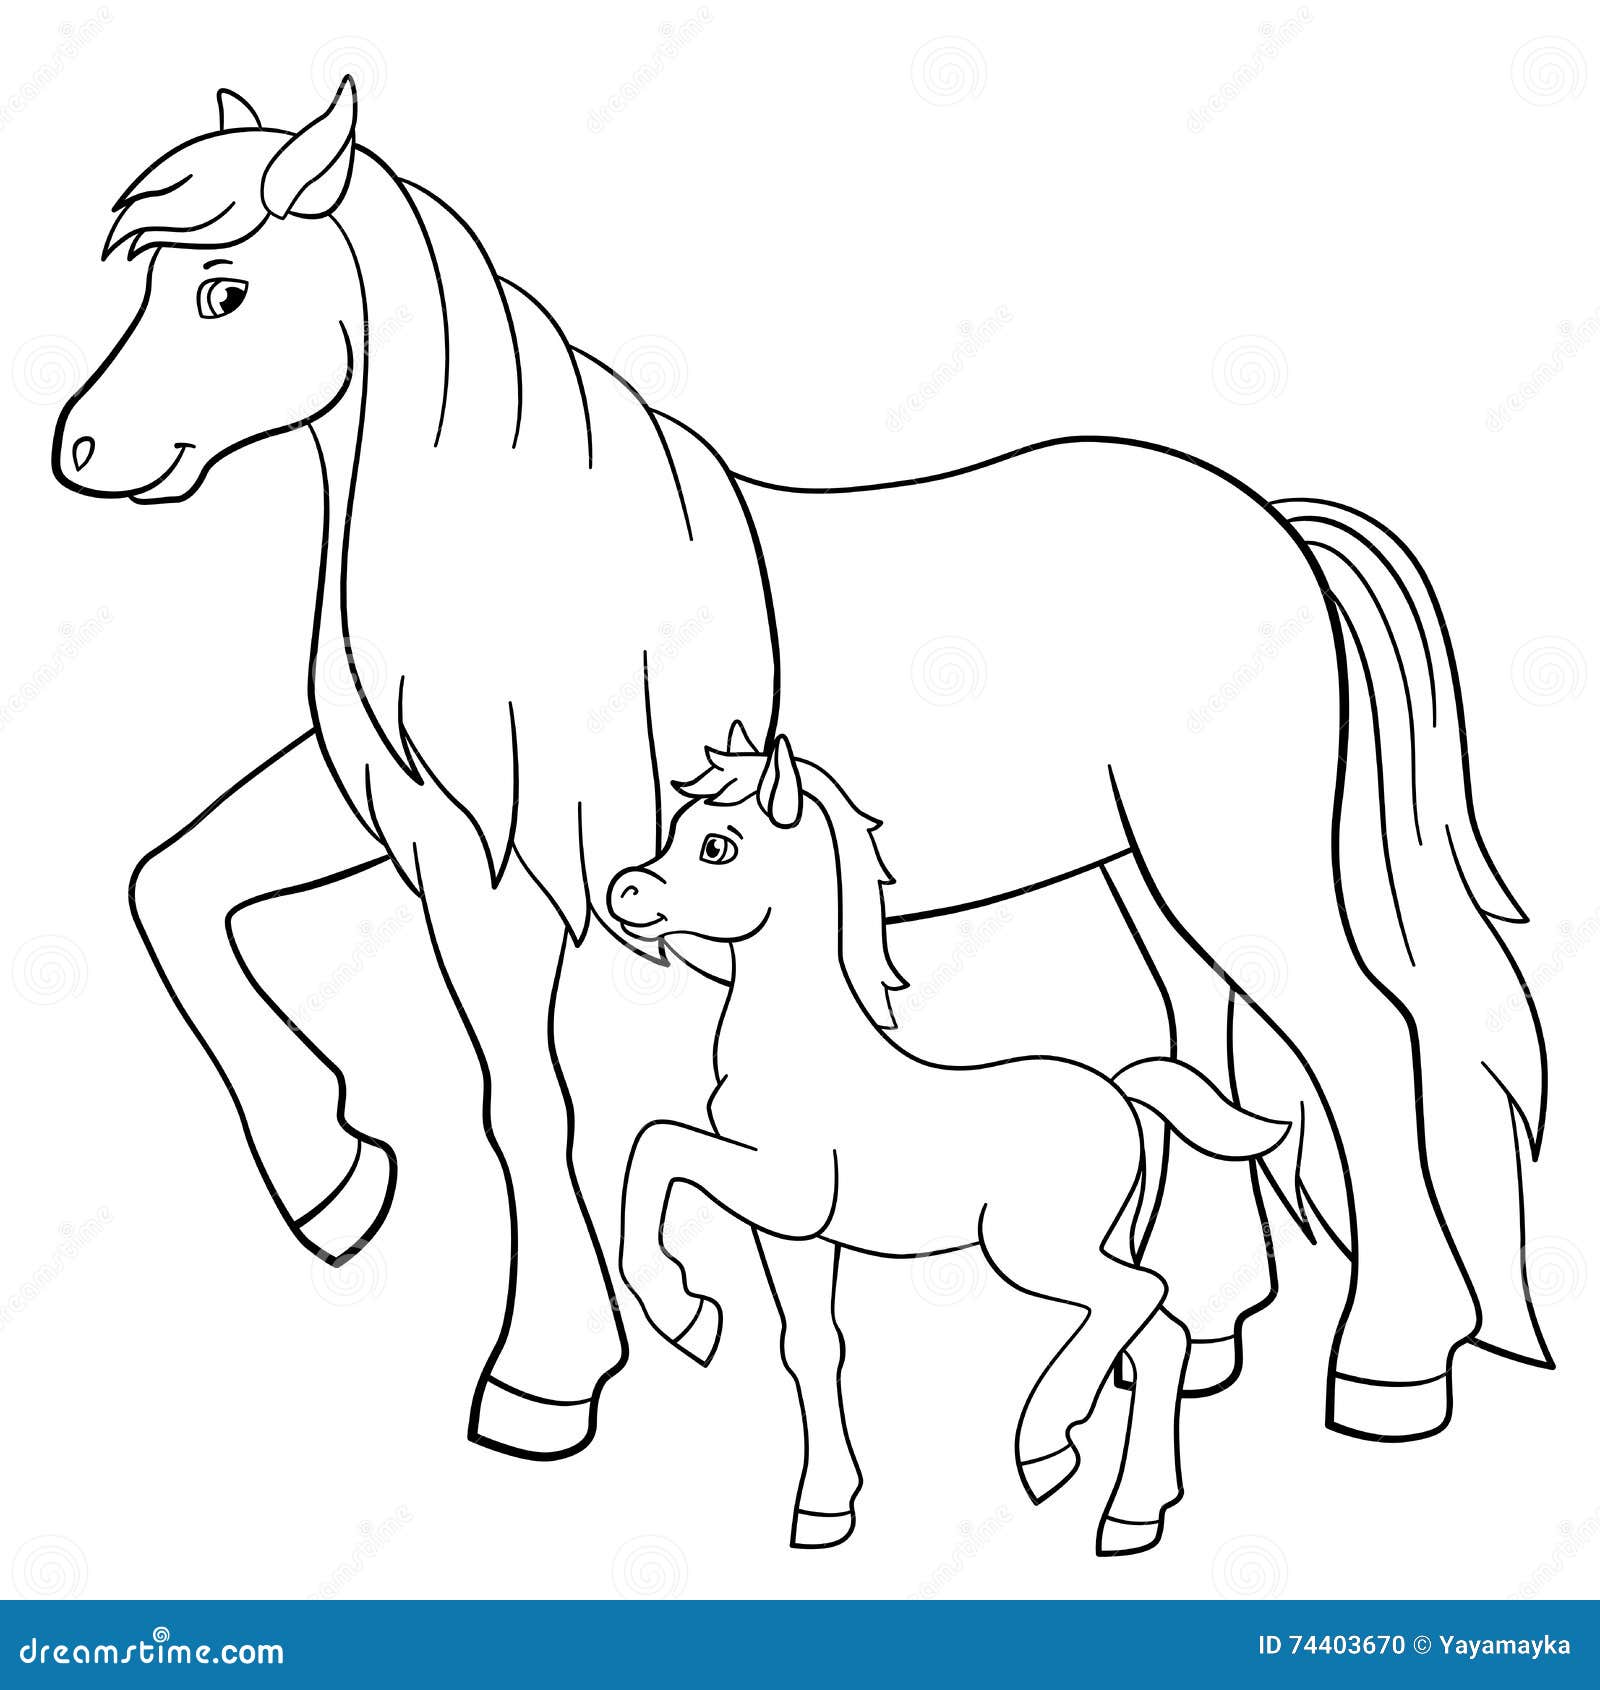 Coloring pages farm animals mother horse with foal stock vector